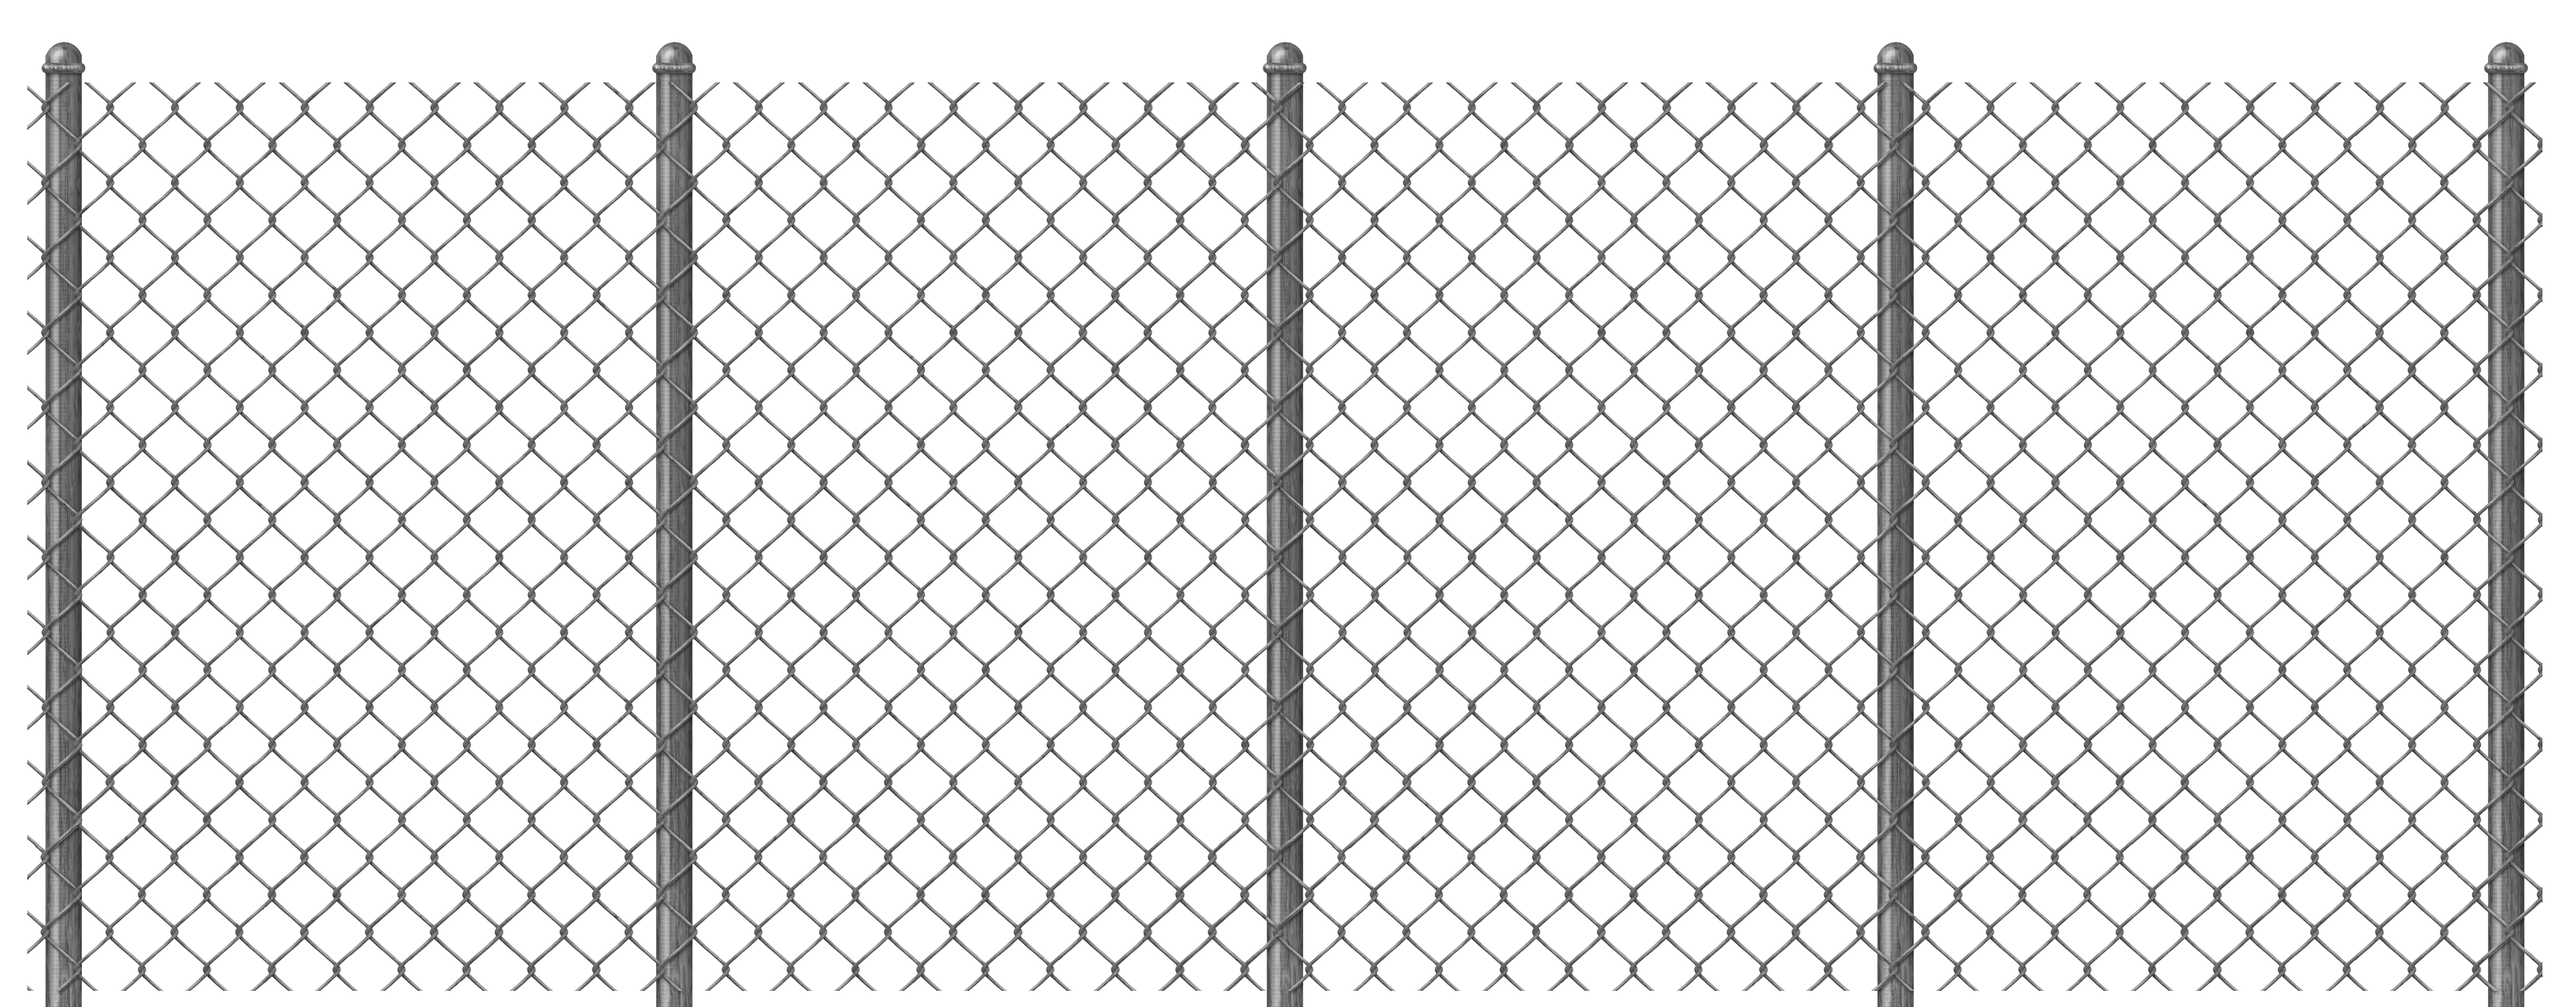 Transparent Chain Link Fence PNG Clipart